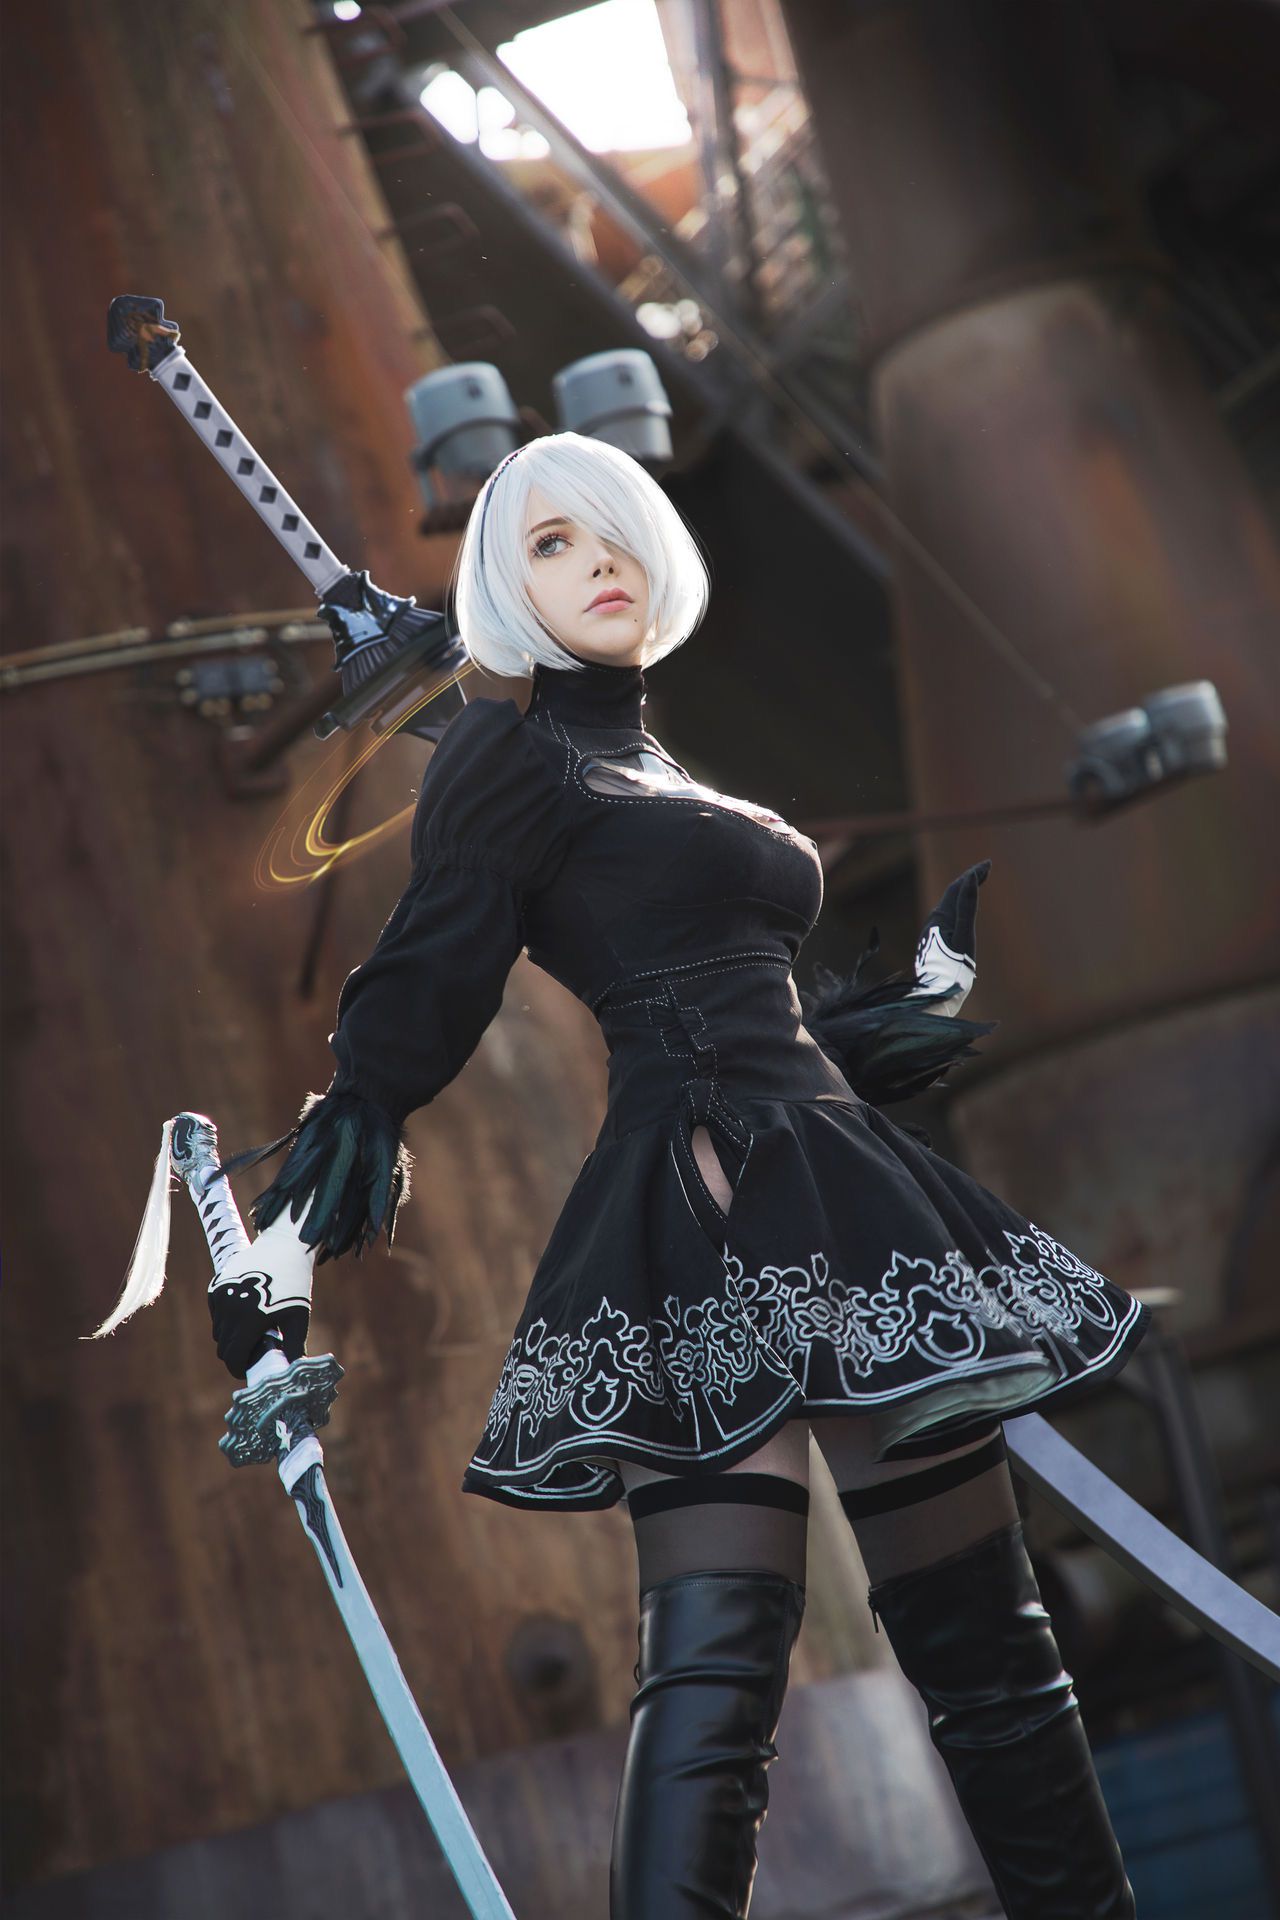 [Image] 2B cosplay erotic too wwwwww of foreign beauty cosplayer 1